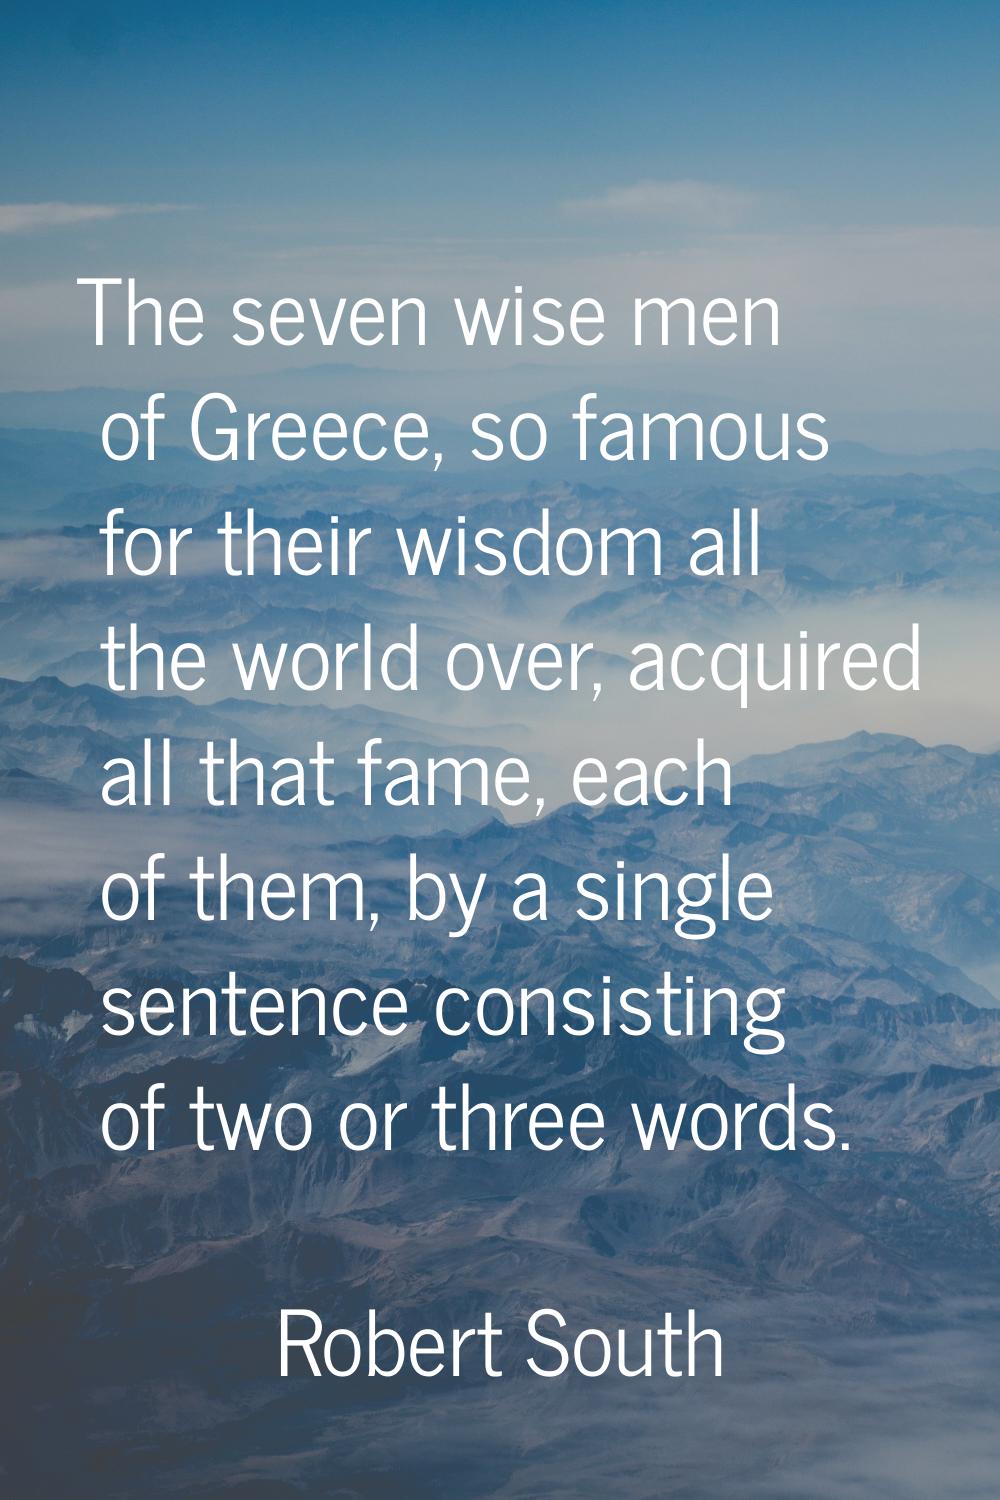 The seven wise men of Greece, so famous for their wisdom all the world over, acquired all that fame